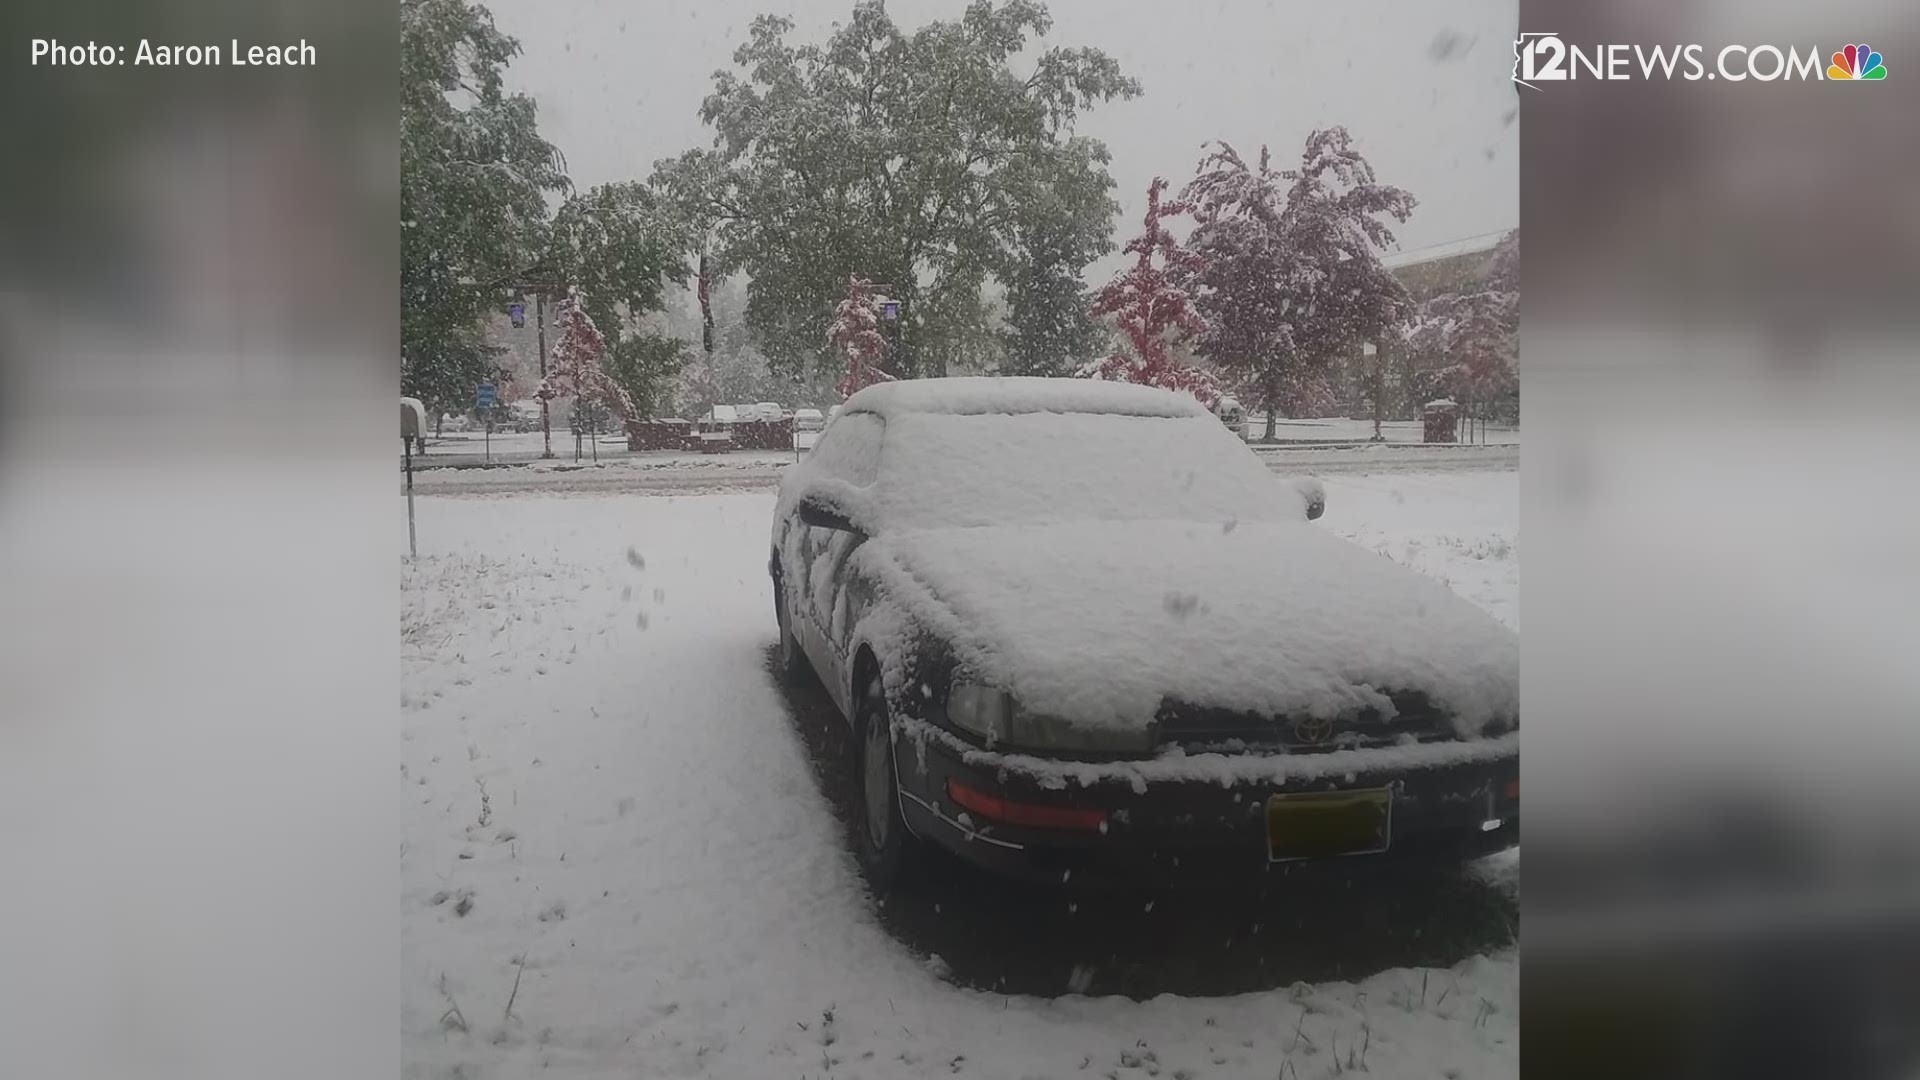 Here are some photos from 12 News viewers of snow in the High Country on Oct. 16, 2018.